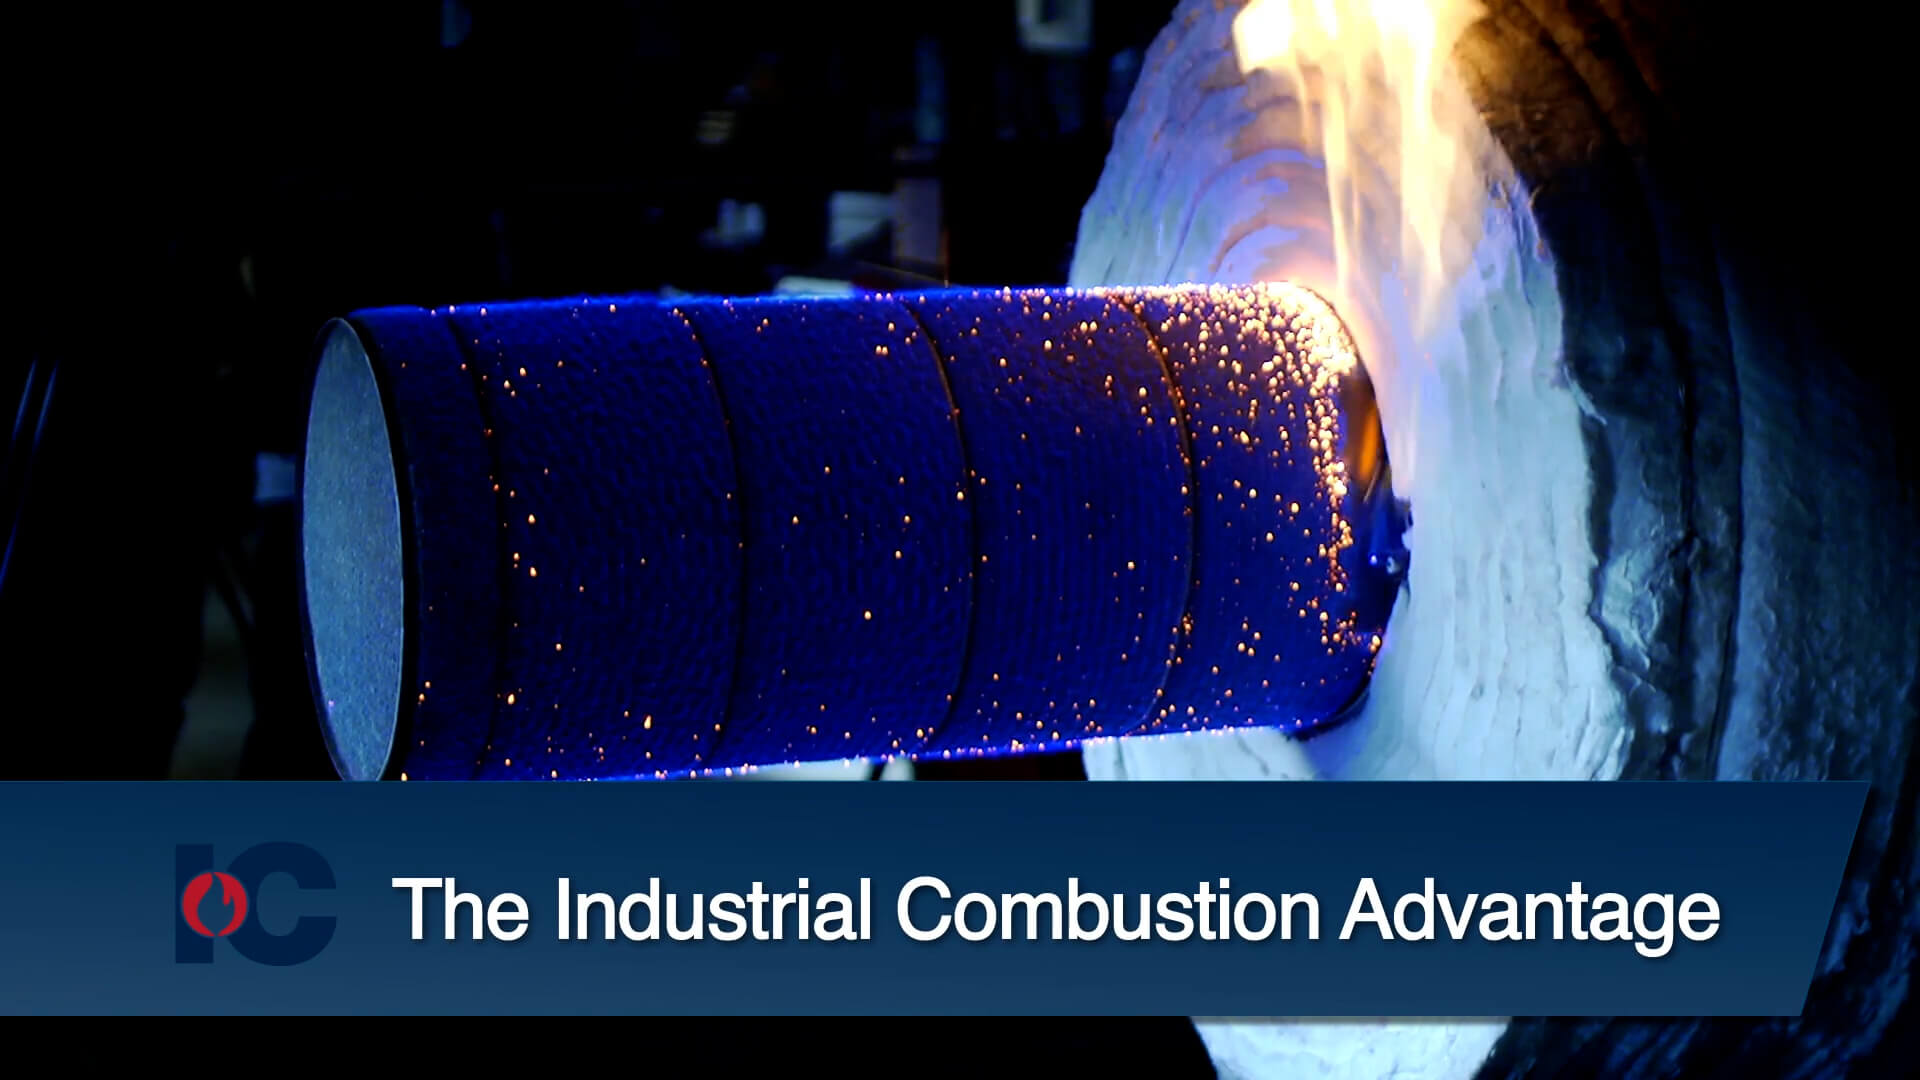 The Industrial Combustion Advantage